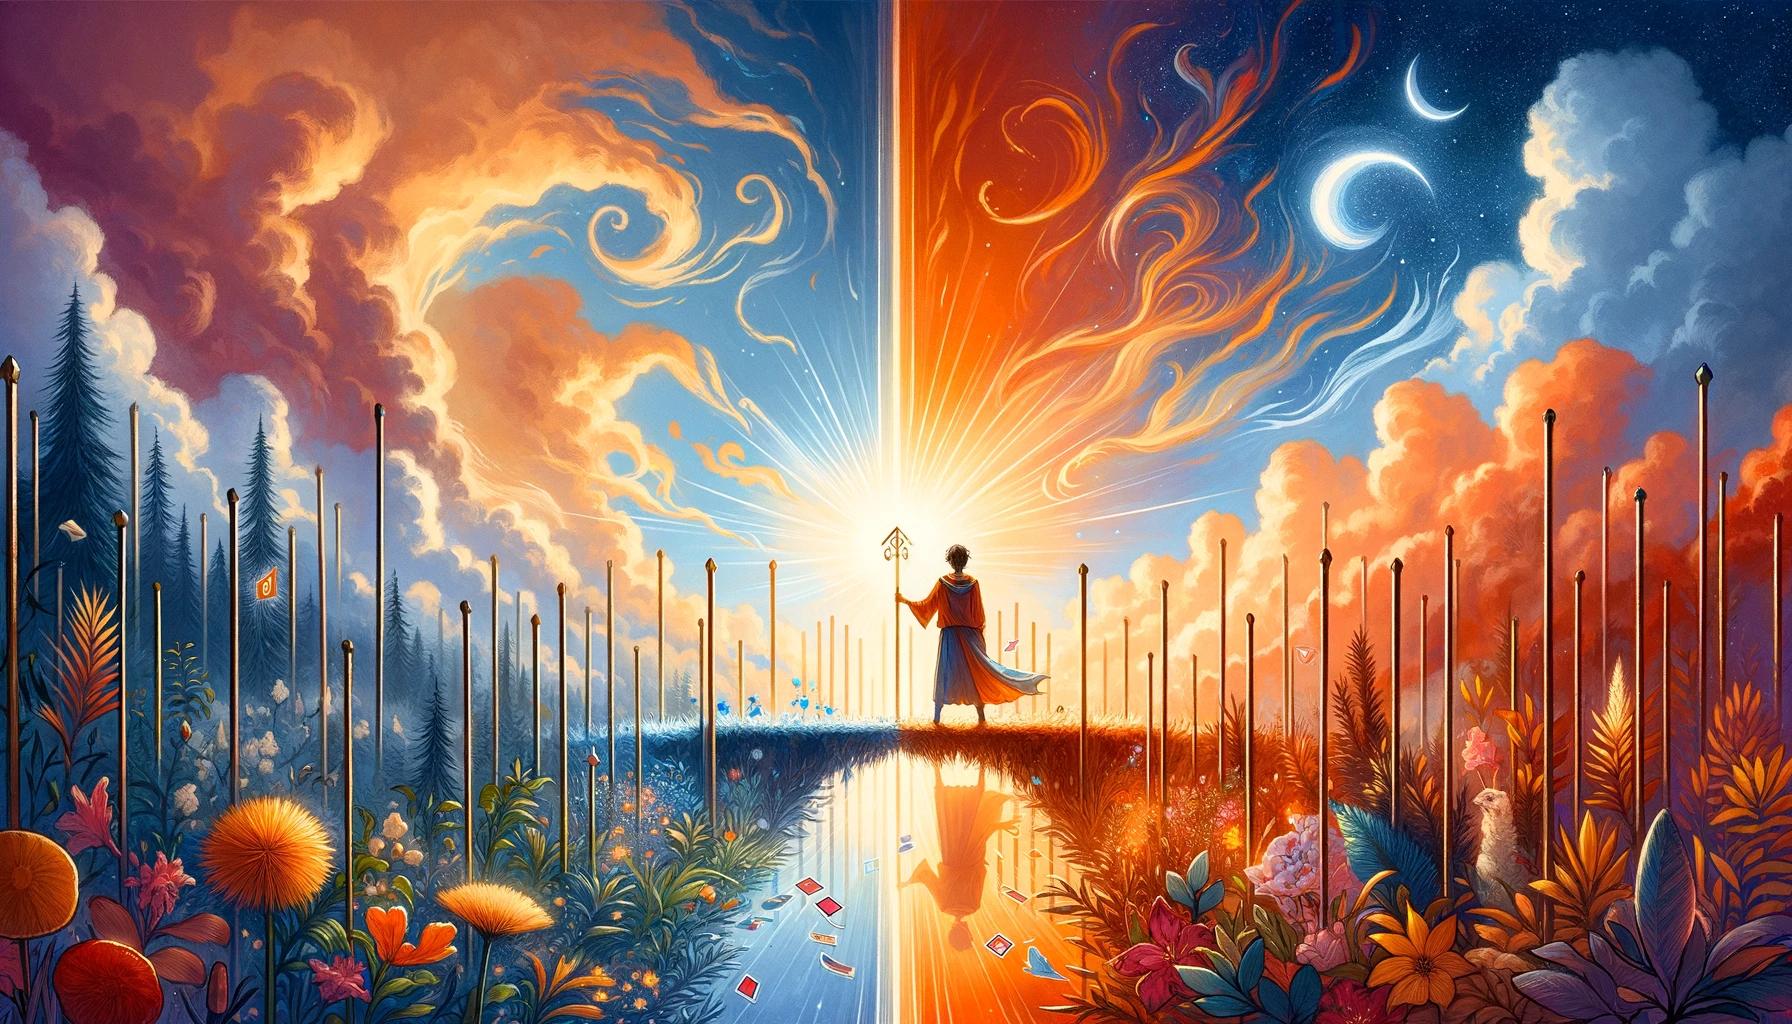 The image illustrates the dynamic energy and potential for new beginnings associated with the card. It features the contrasting sections of 'Yes' and 'No' answers through the Page of Wands in both its upright and reversed positions. Set against a backdrop that highlights the card's dual nature in answering yes or no questions, it embodies the potential outcomes of a query with vibrant energy and creativity on one side and delays or the need for introspection on the other.